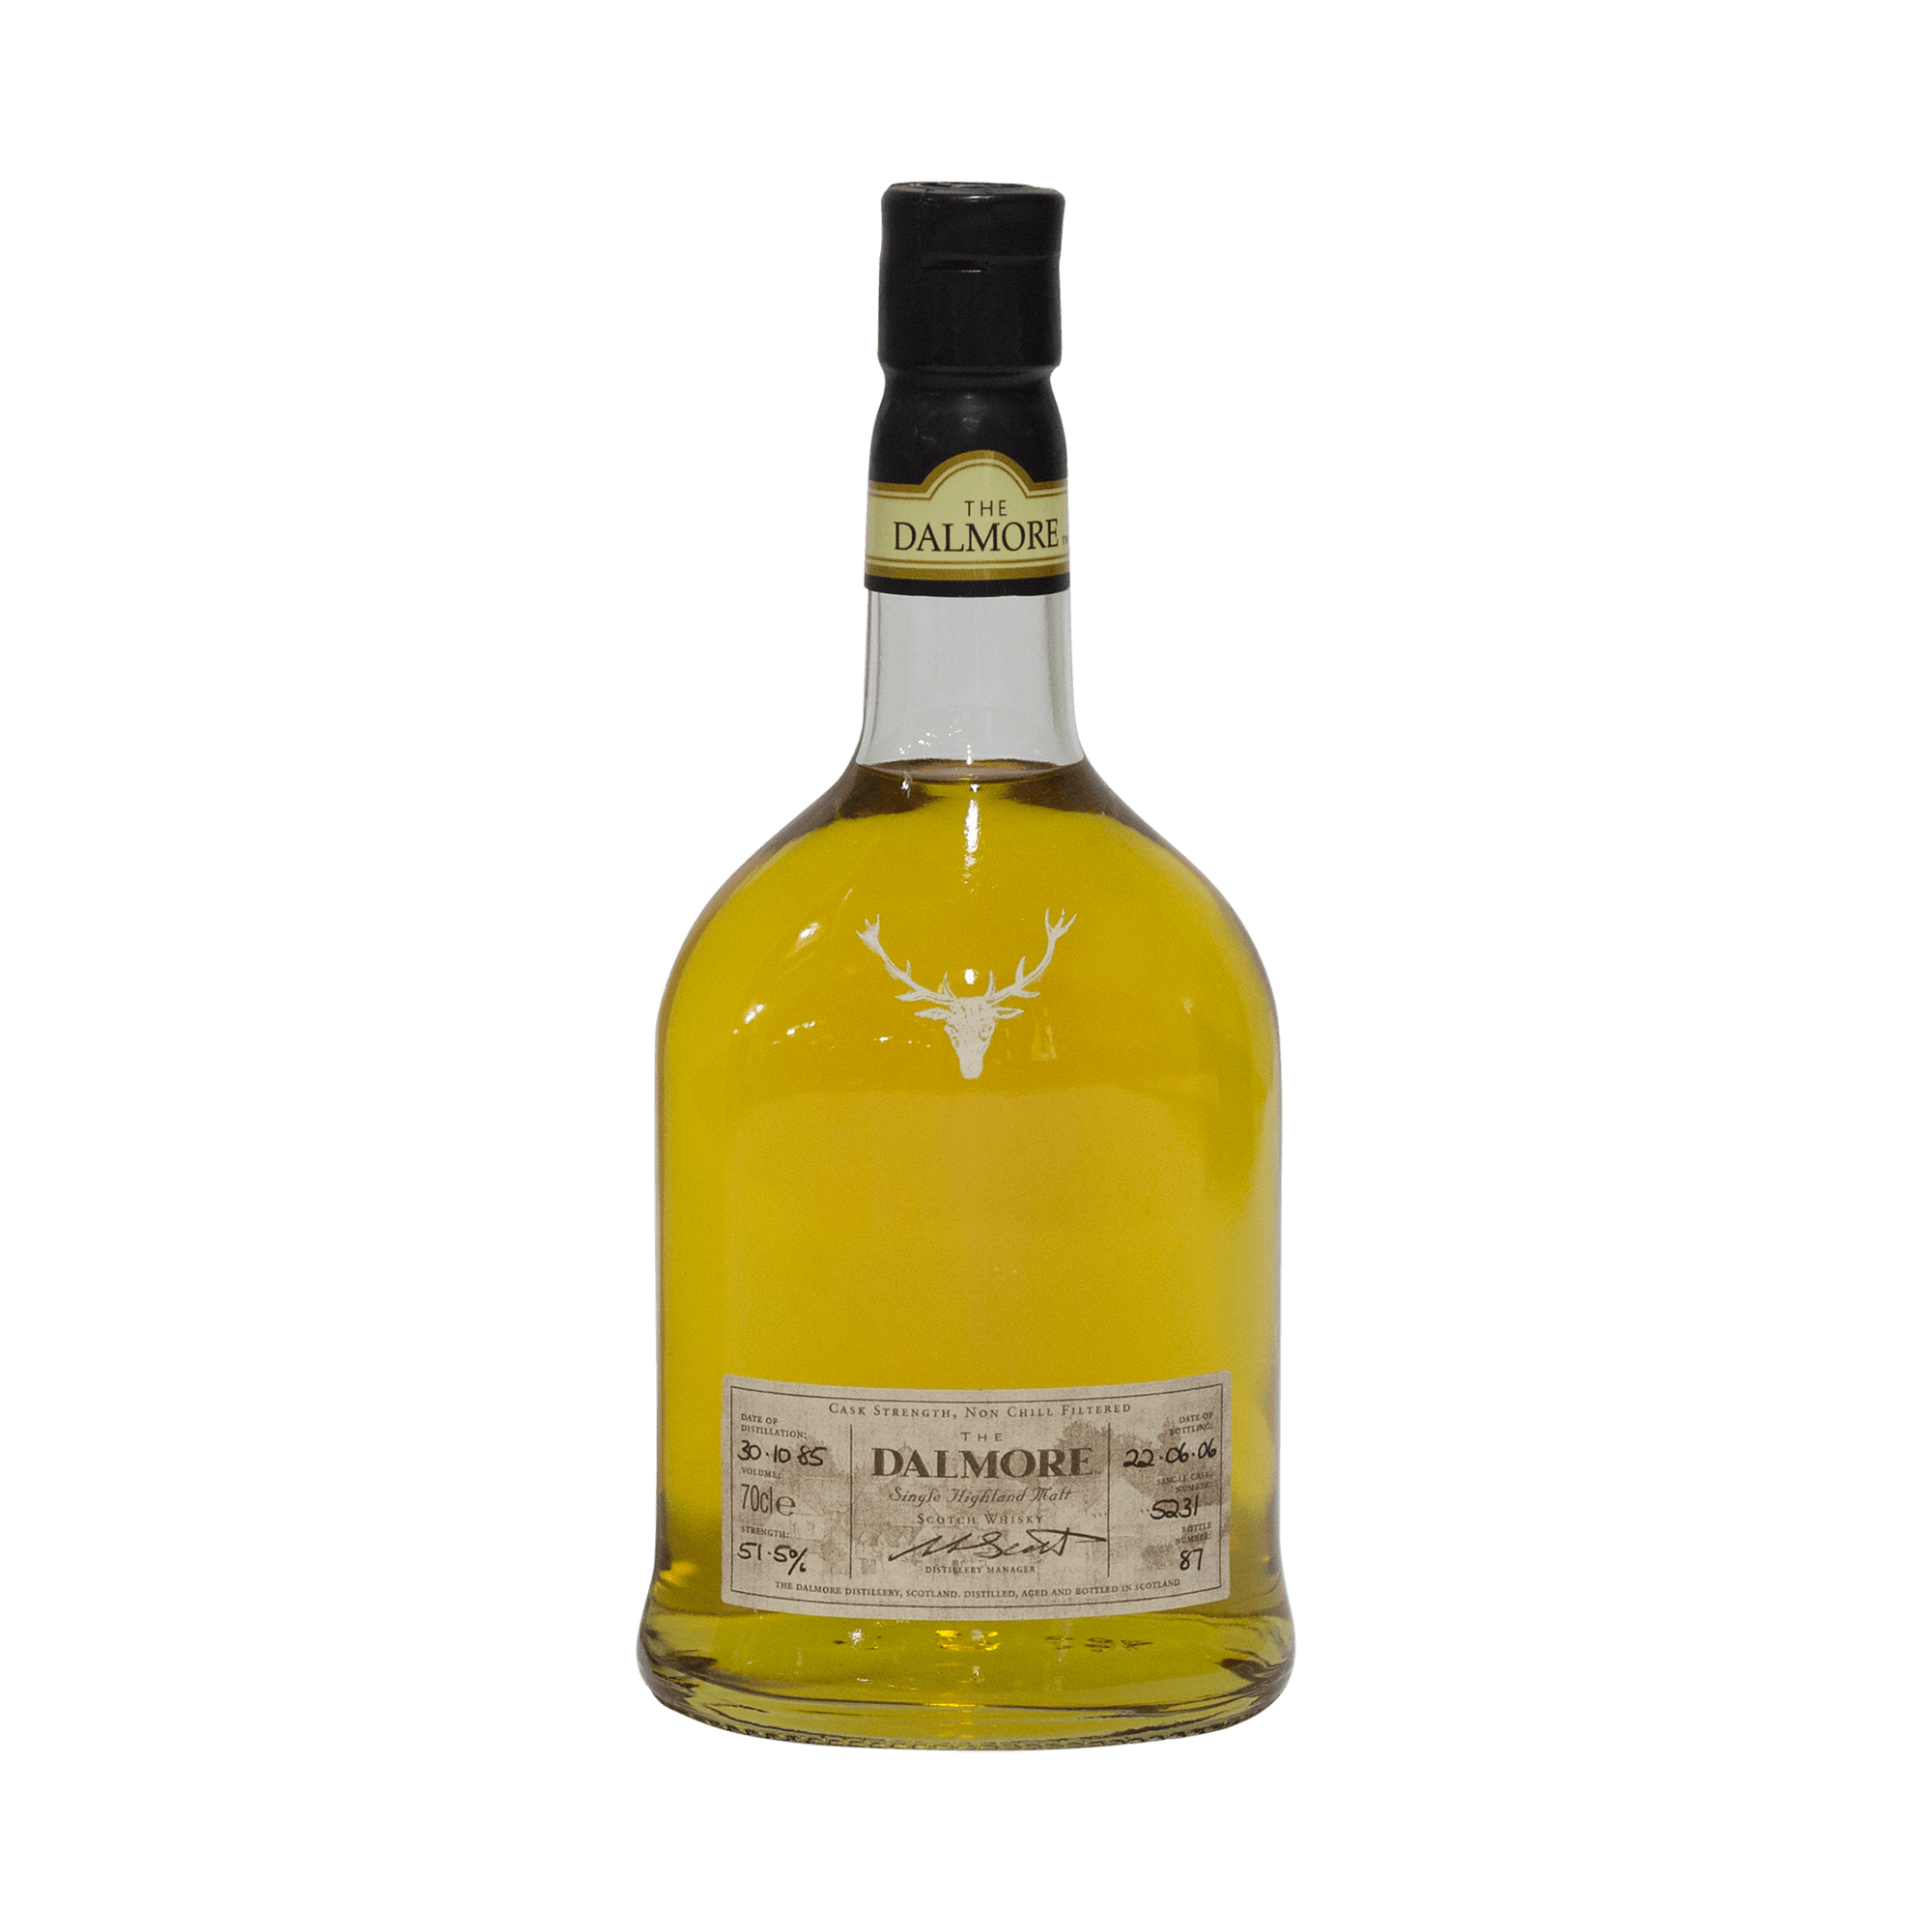 Dalmore 1985 20 Year Old Limited Edition 51.50%